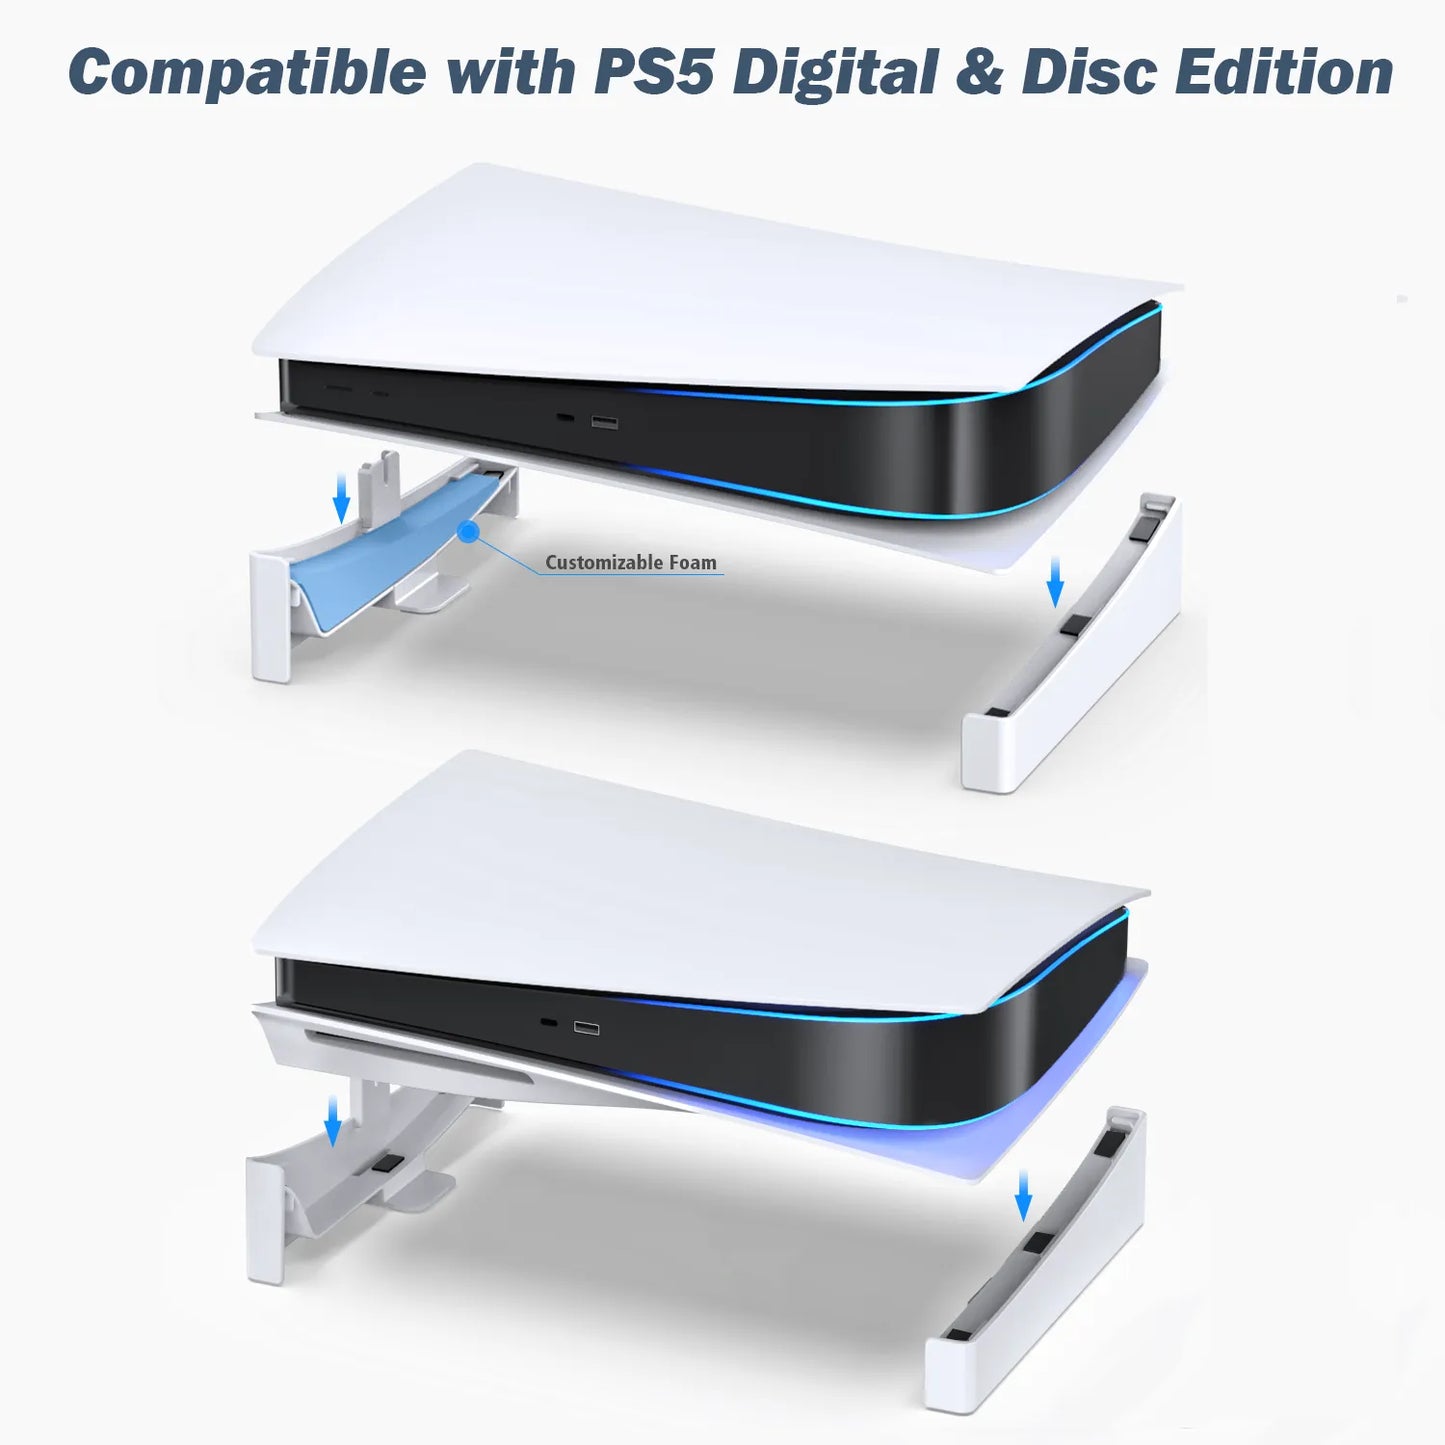 PS5 Console Holder Horizontal Stand Base for Playstation 5